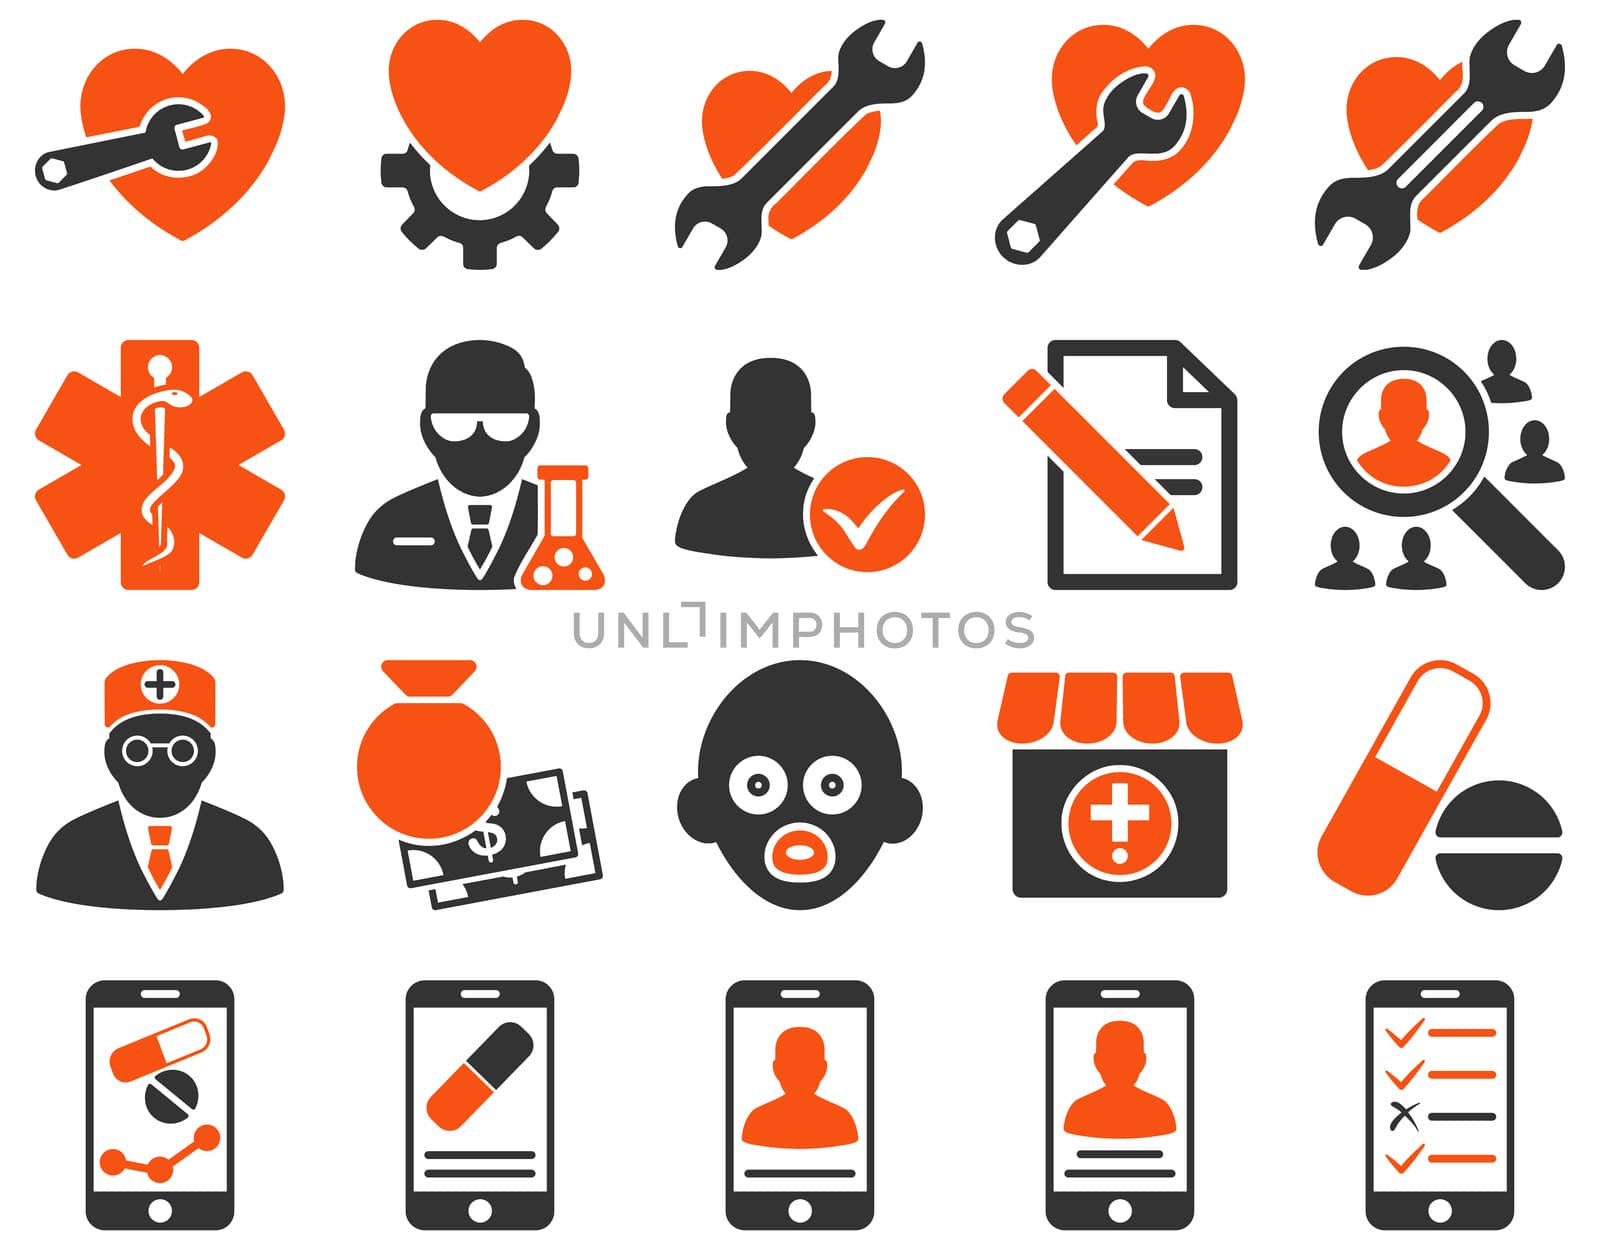 Medical icon set. Style: bicolor icons drawn with orange and gray colors on a white background.